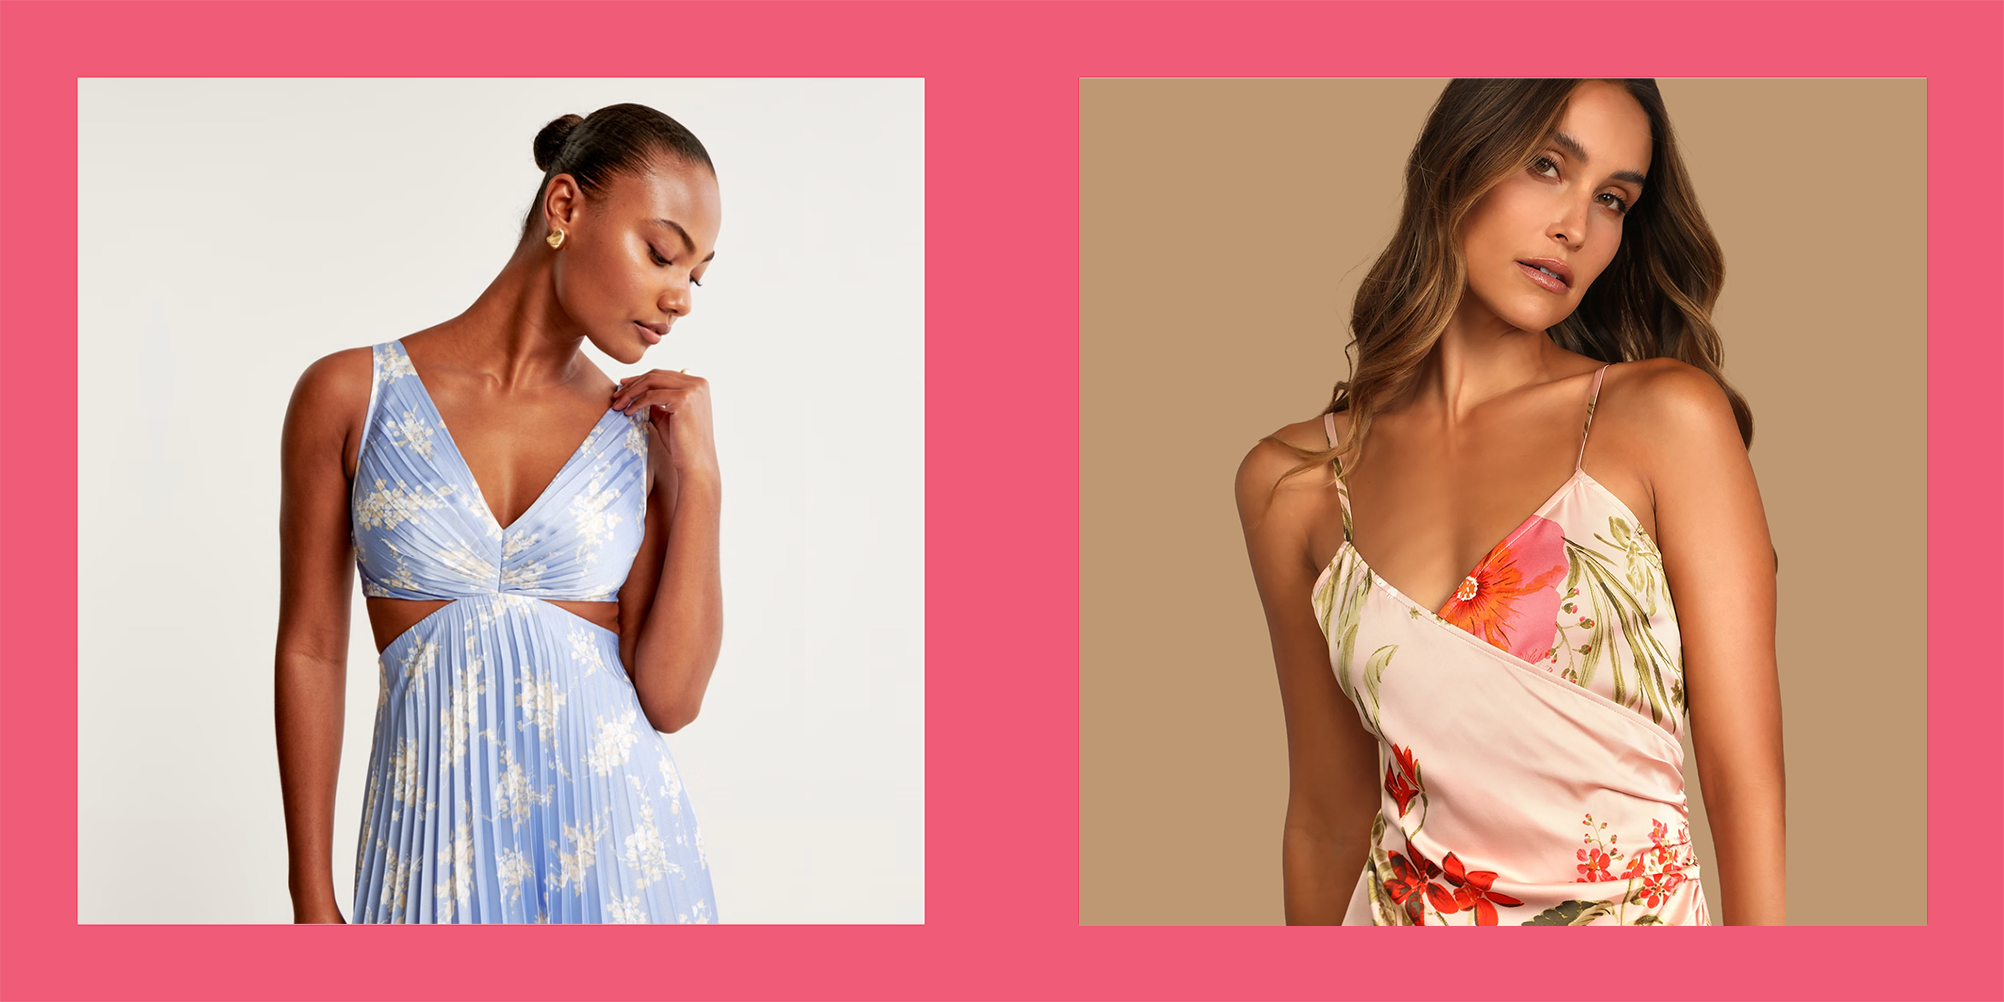 Spring Wedding Guest Dresses: 14 Looks That Will Guarantee Compliments